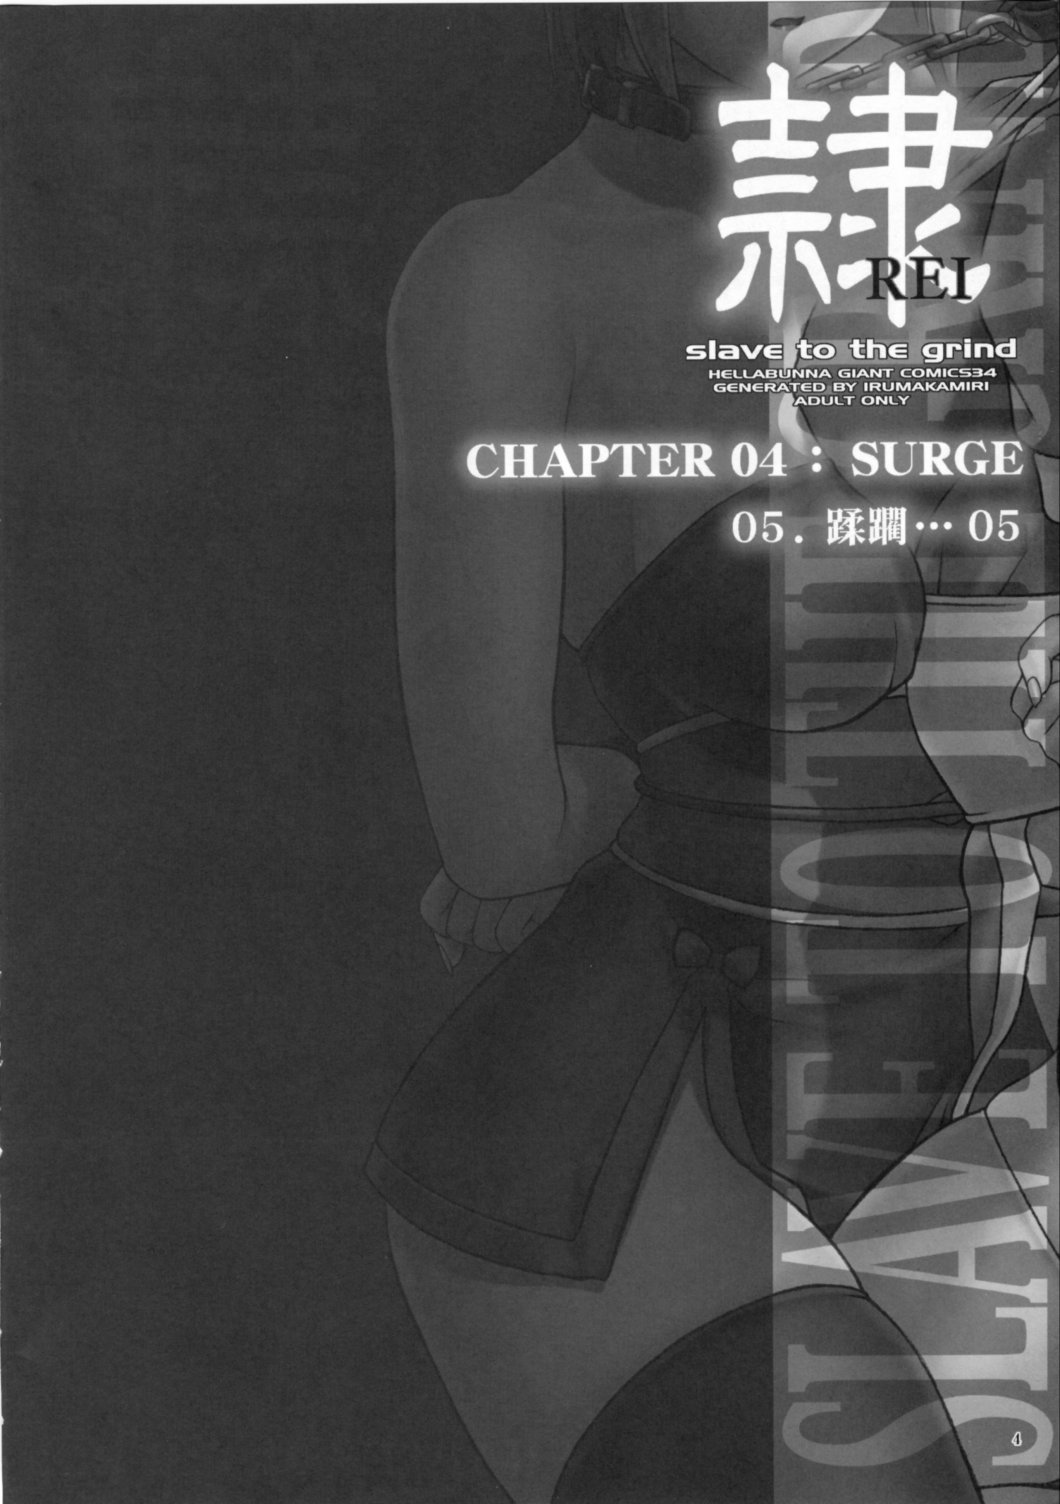 (C72) [Hellabunna (Iruma Kamiri)] REI - slave to the grind - CHAPTER 04: SURGE (Dead or Alive) page 3 full